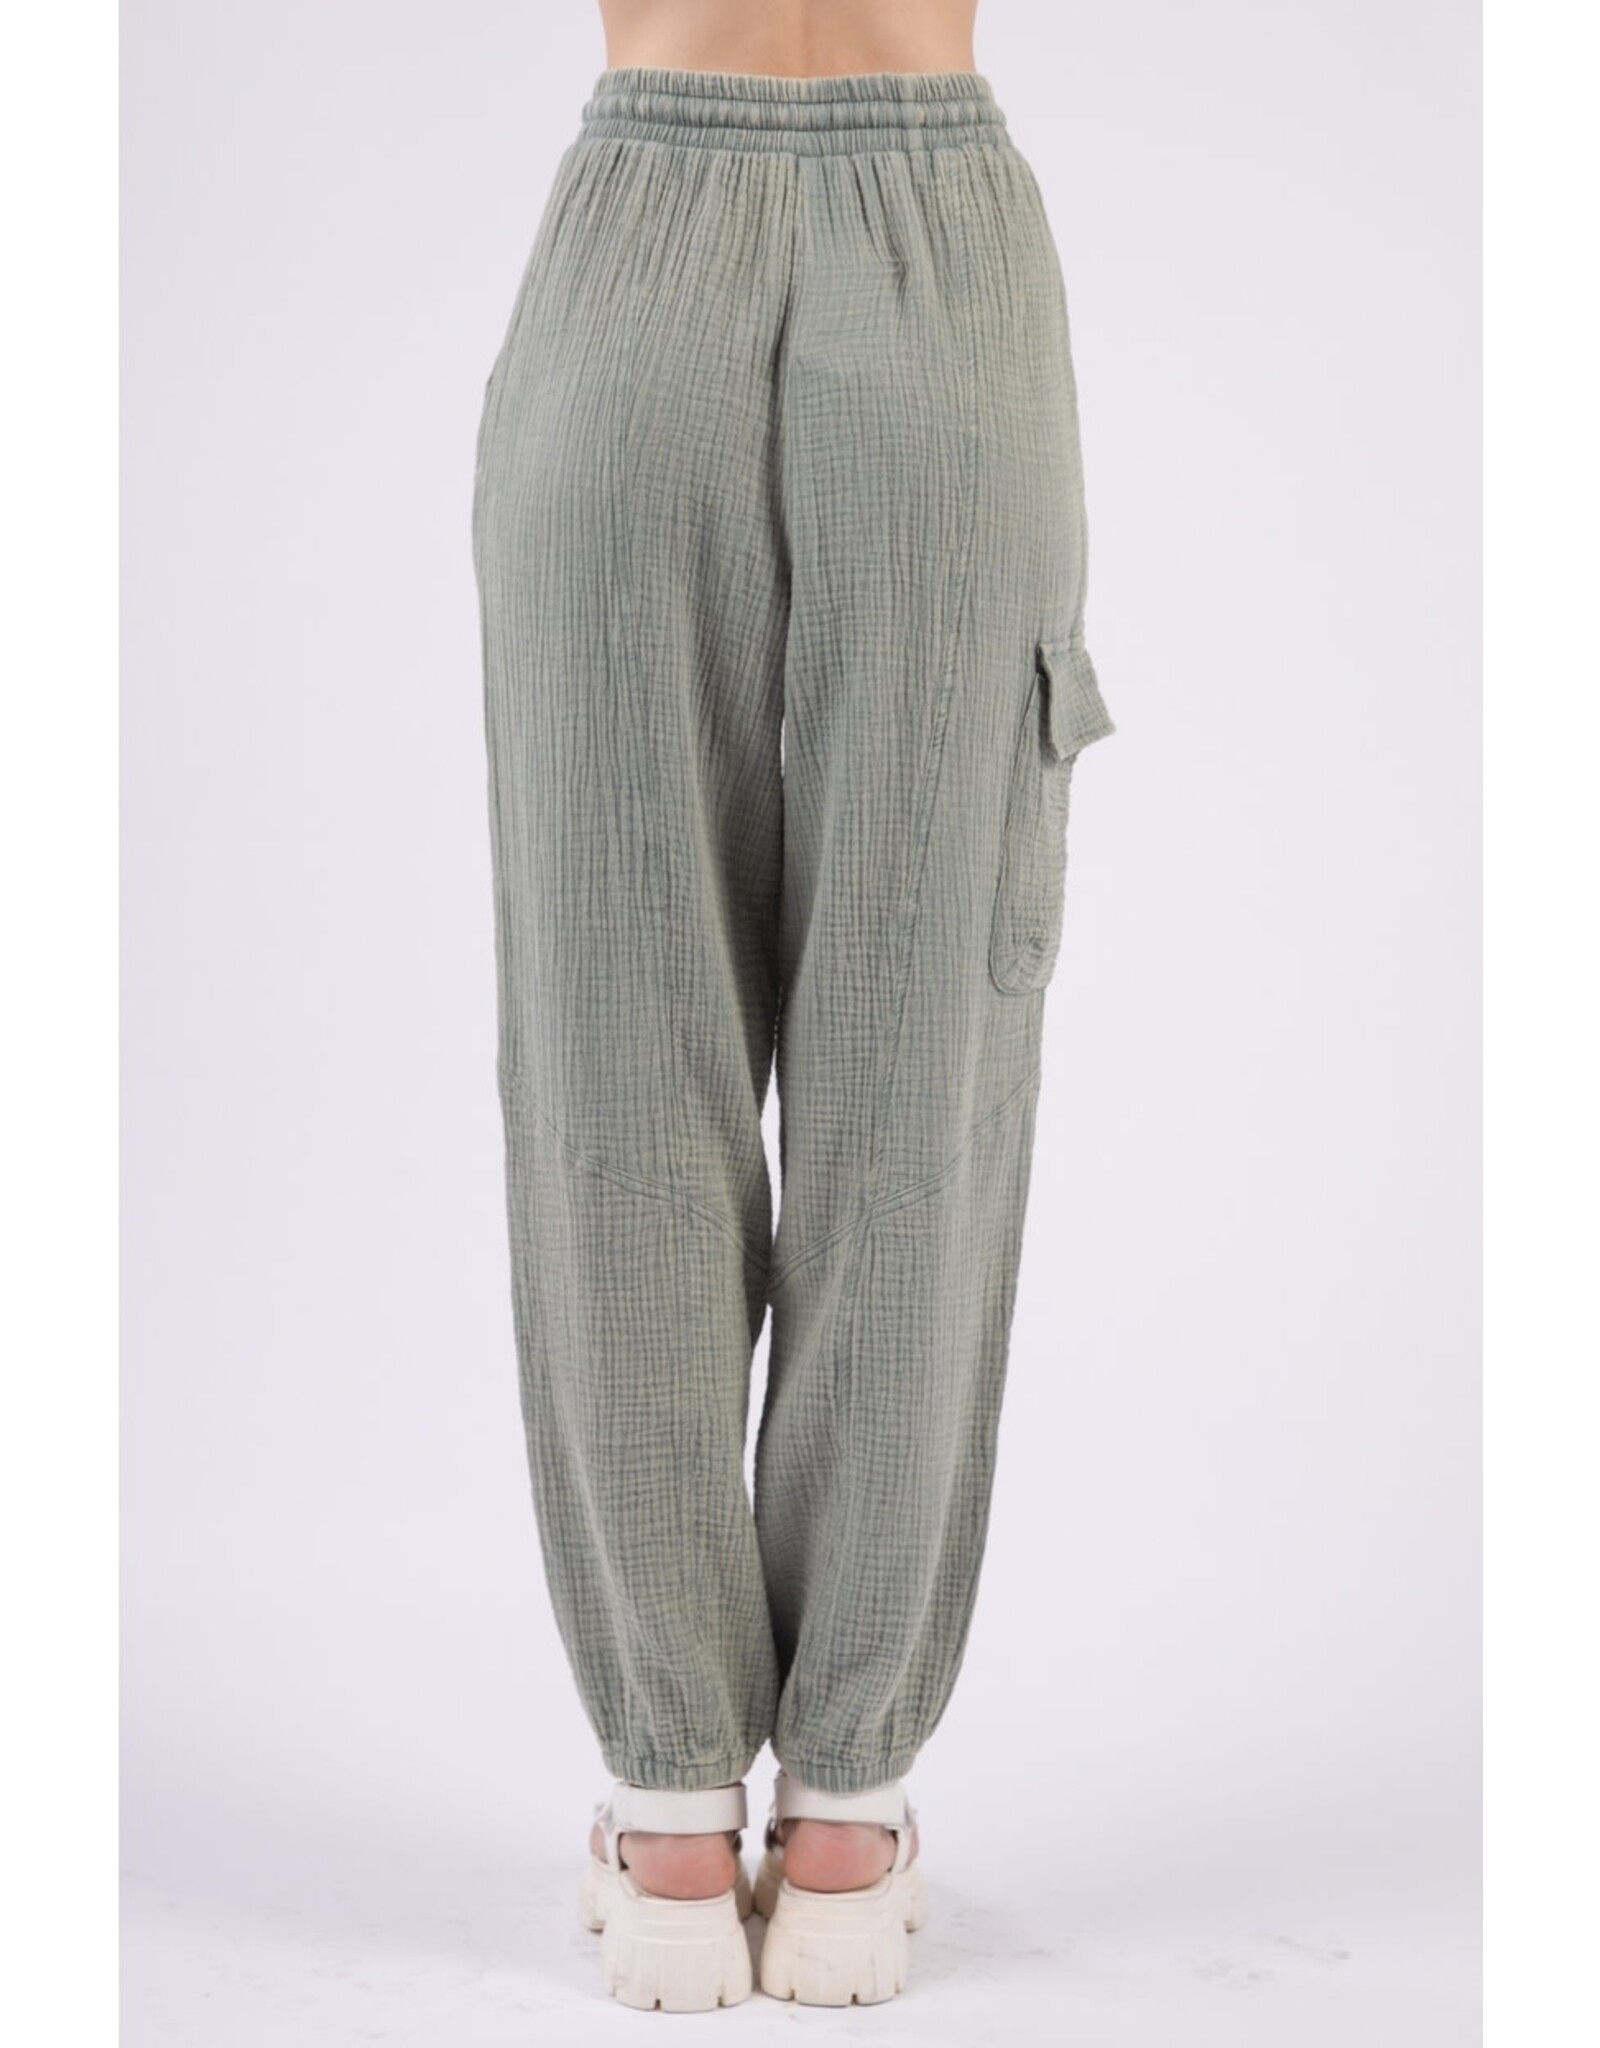 Very J Washed Woven Crinkle Cargo Pants